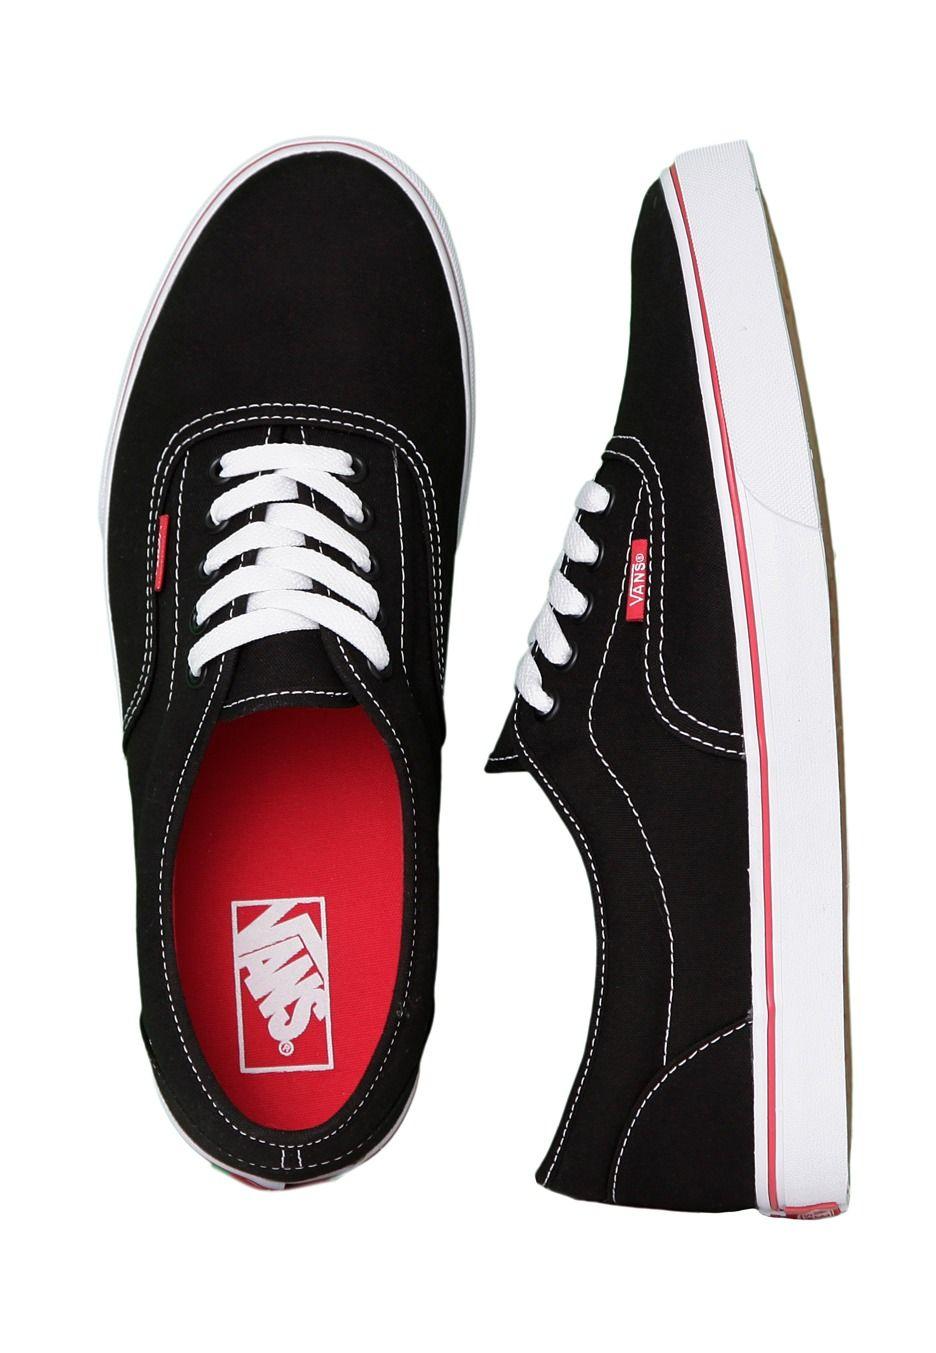 Black and Red Vans Logo - Vans - LPE Black/Red - Shoes - Impericon.com UK